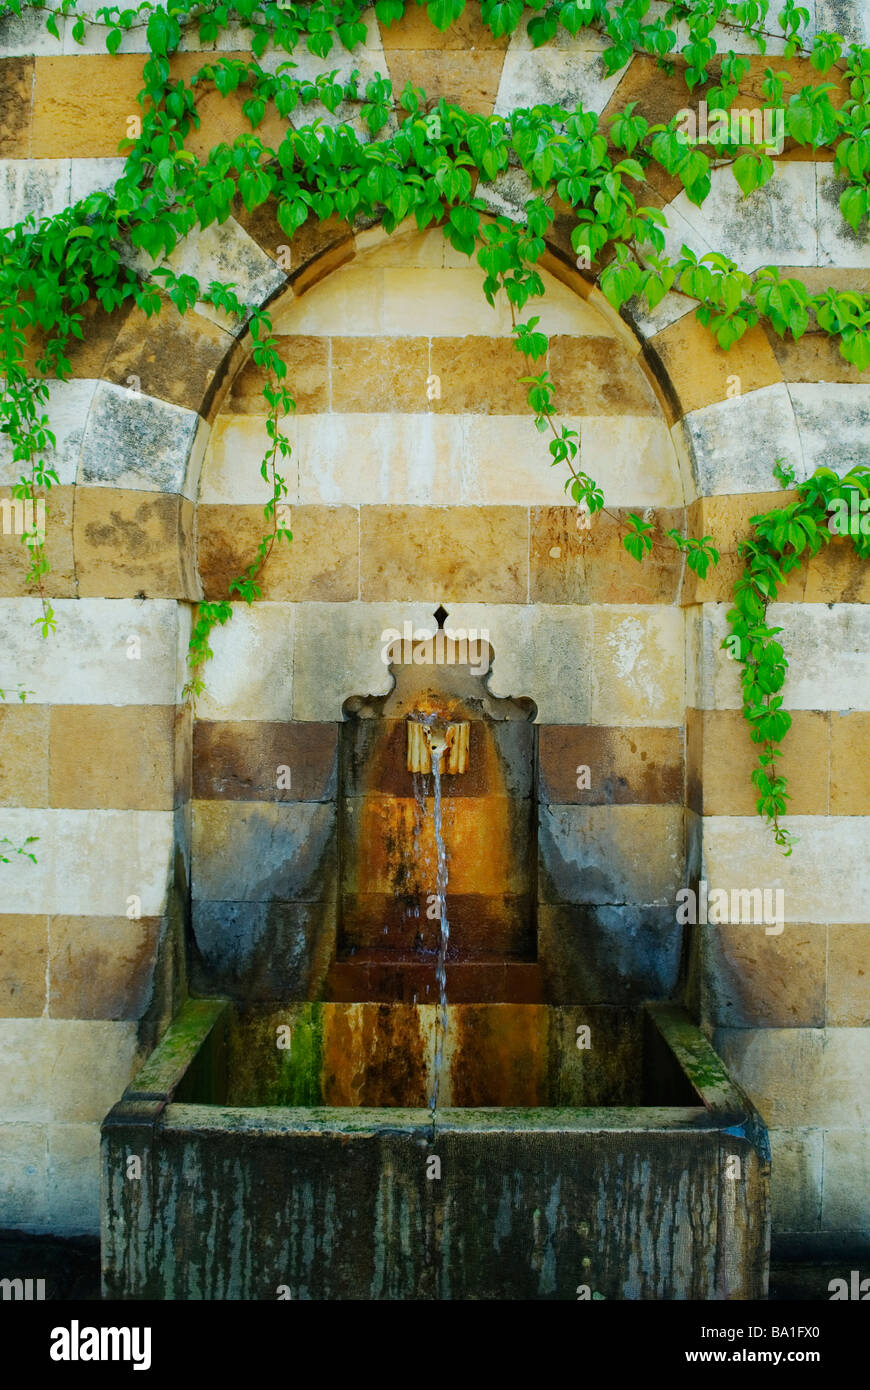 Drinking water feature Beit El Deen Lebanon Middle East Asia Stock Photo